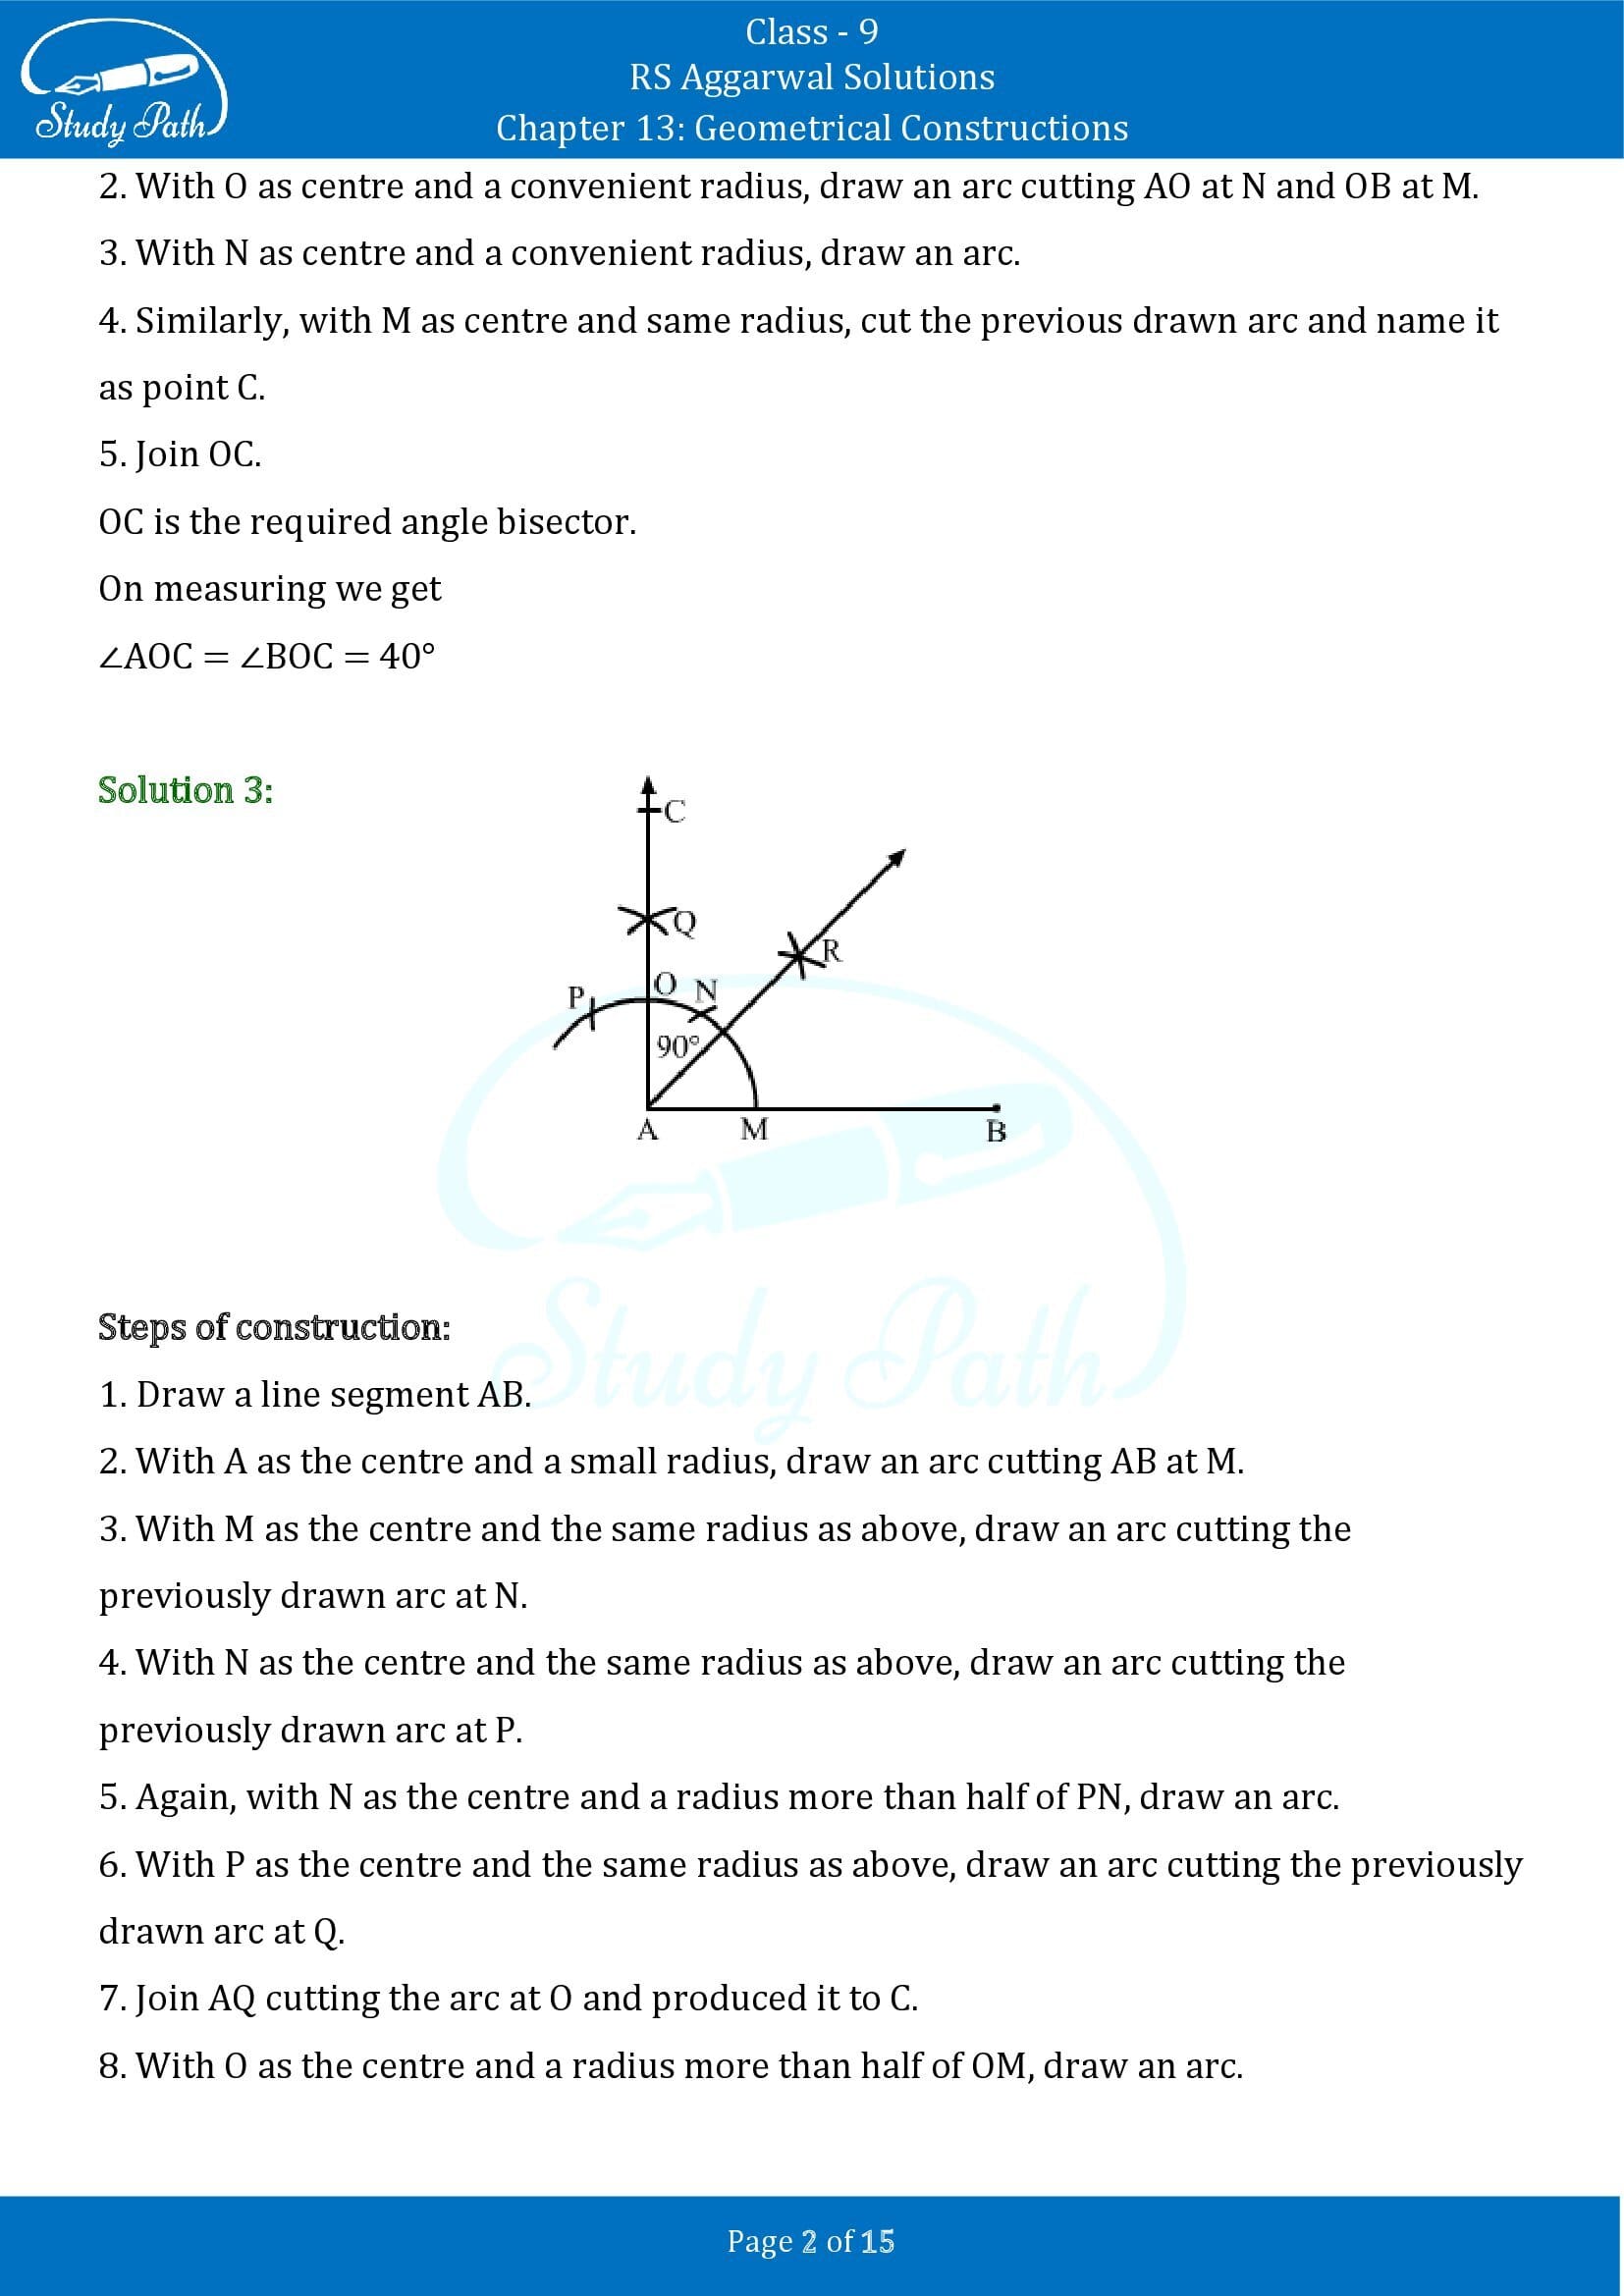 RS Aggarwal Solutions Class 9 Chapter 13 Geometrical Constructions 02